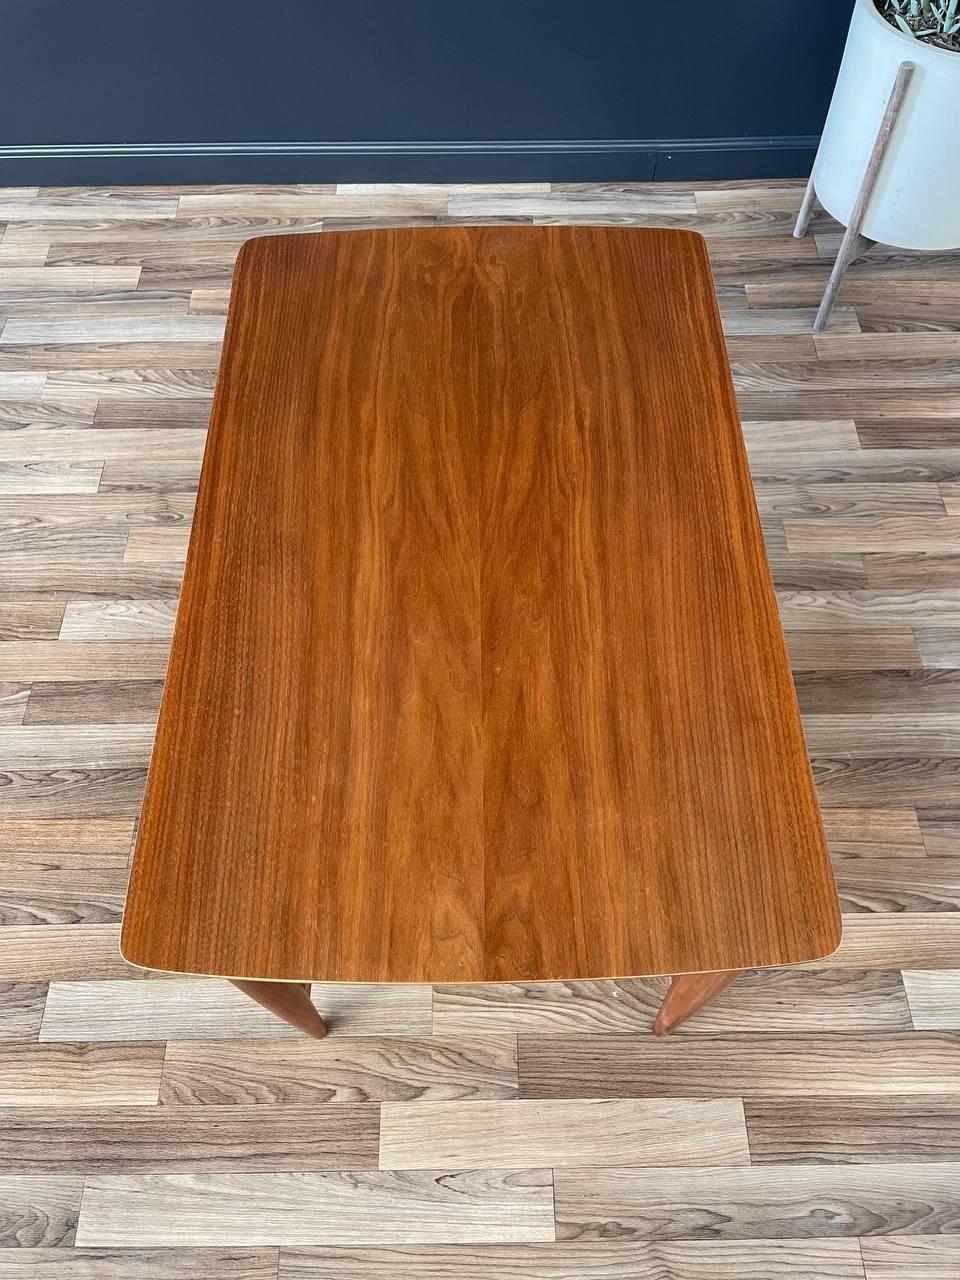 Newly Refinished - Mid-Century Modern Walnut Two-Tier Side Table by Mersman For Sale 2